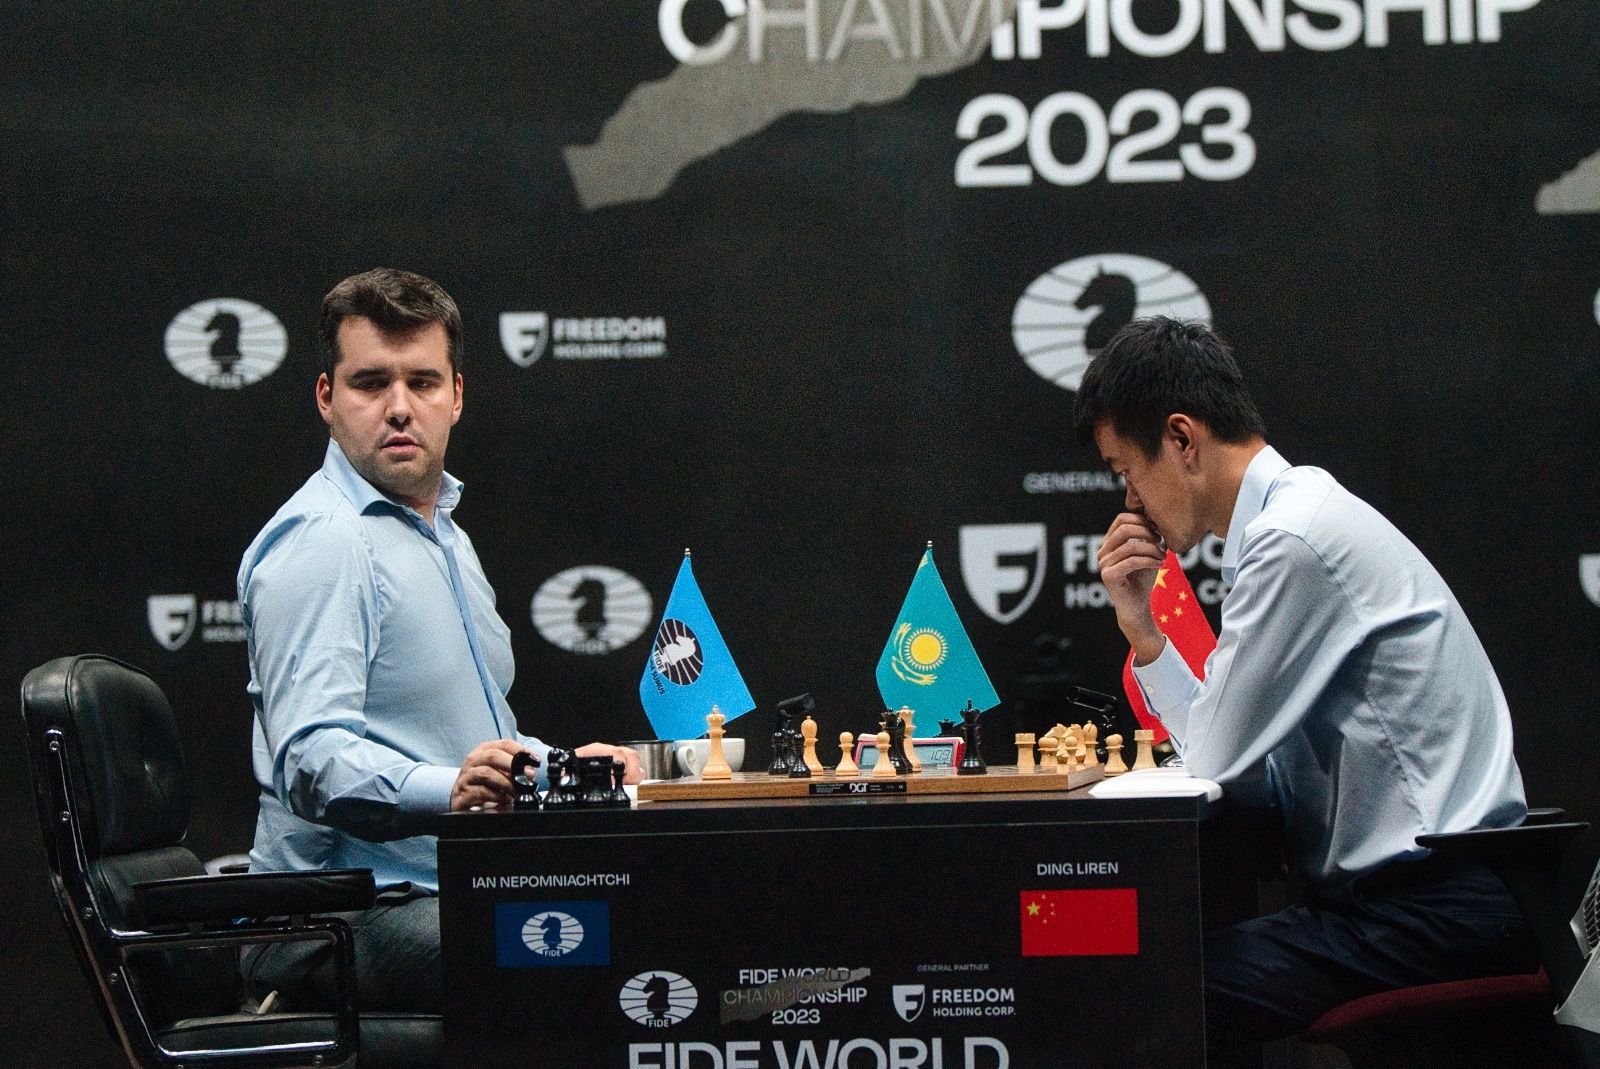 World Chess Championship 2023: Reactions, Statistics, and Impressions